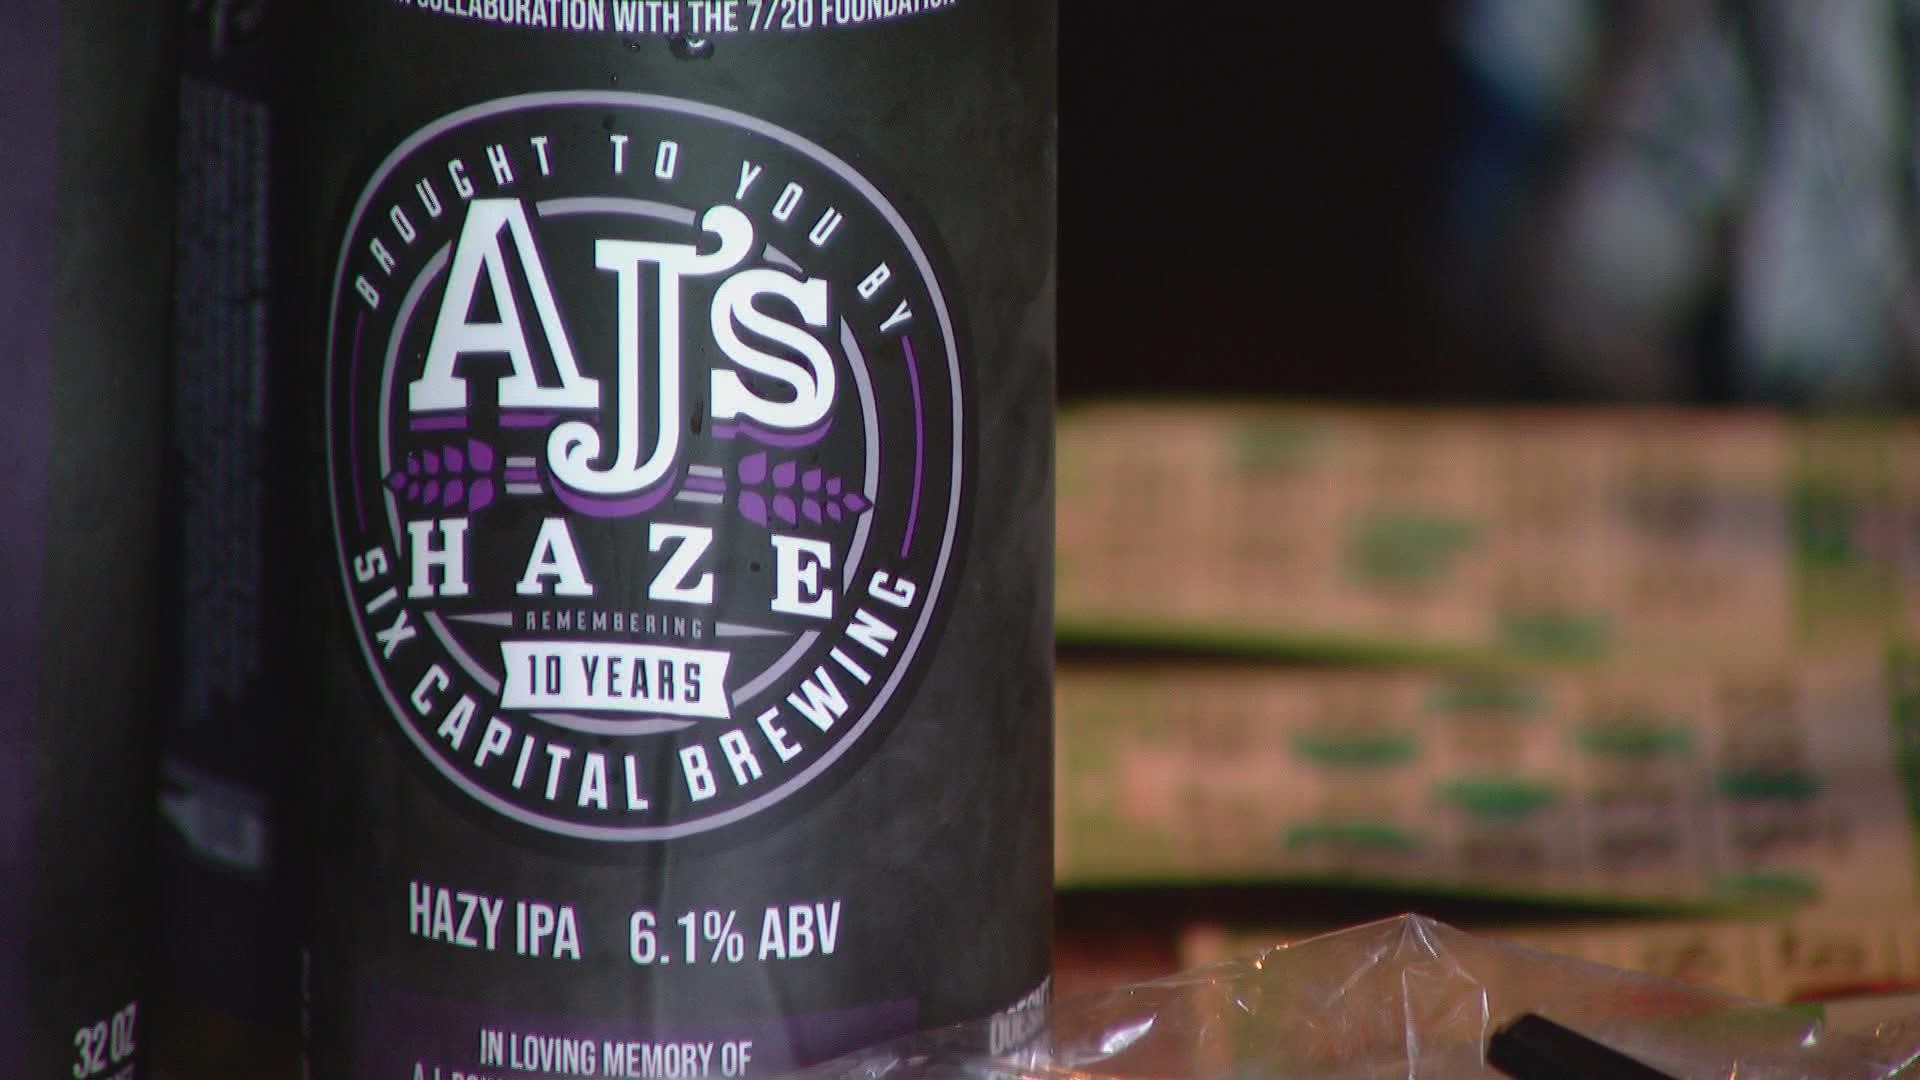 A new beer called AJ's Haze flowed out of the taps at Six Capital Brewing on Thursday; brewed by the family of AJ Boik, who was killed during the theater shooting.